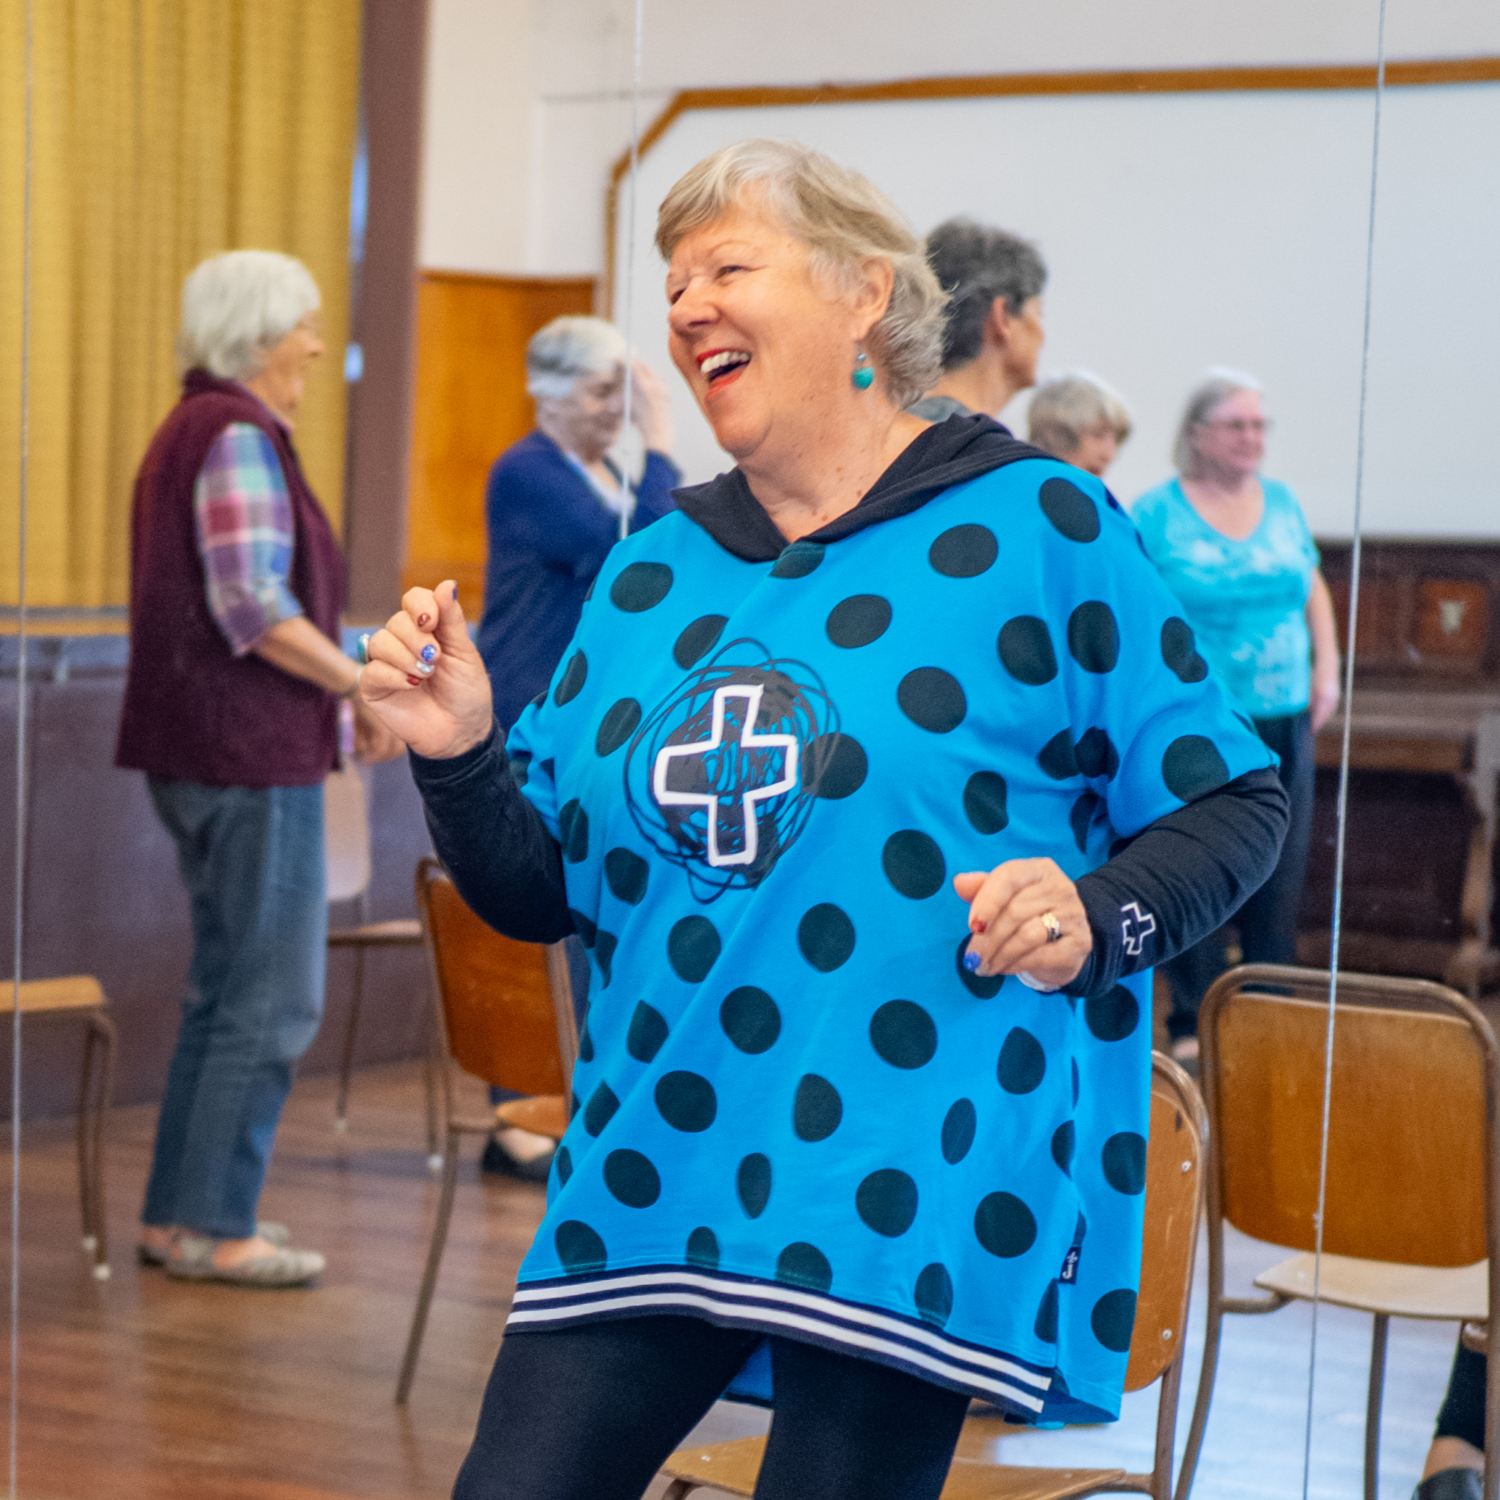 a smiling Pakeha woman in a blue top with black spots is dancing in three quarter profile